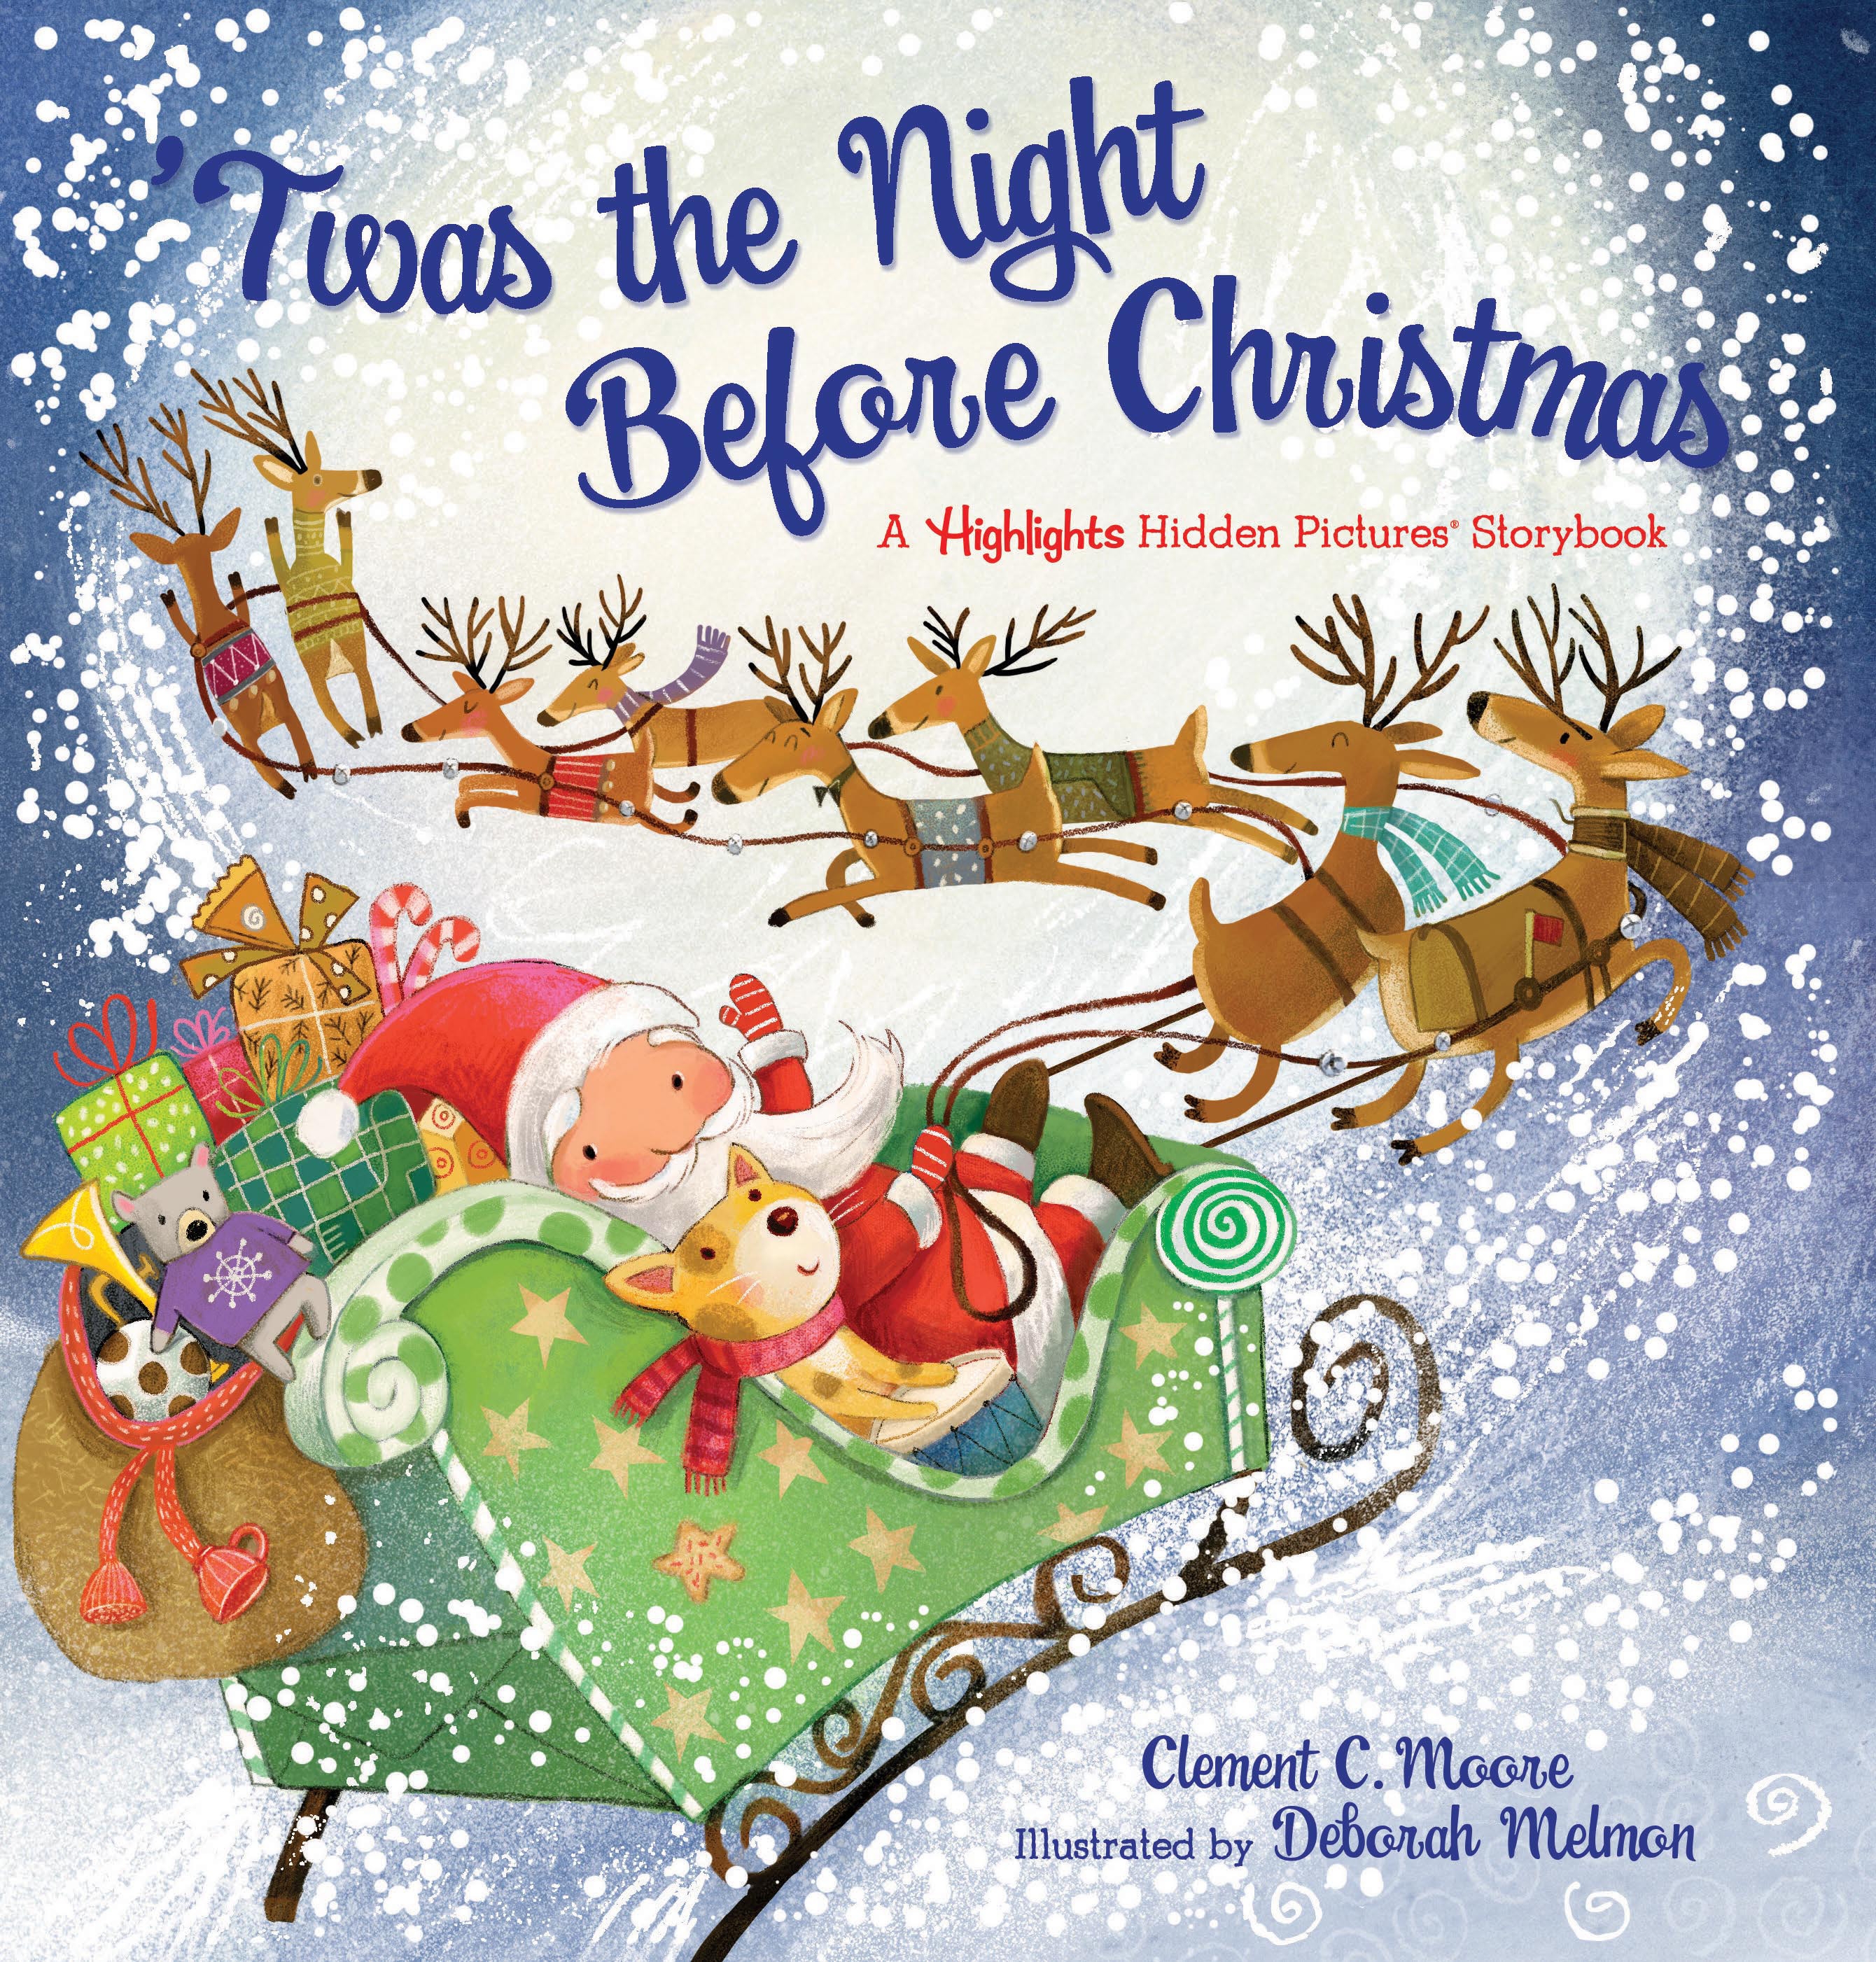 twas the night before christmas by